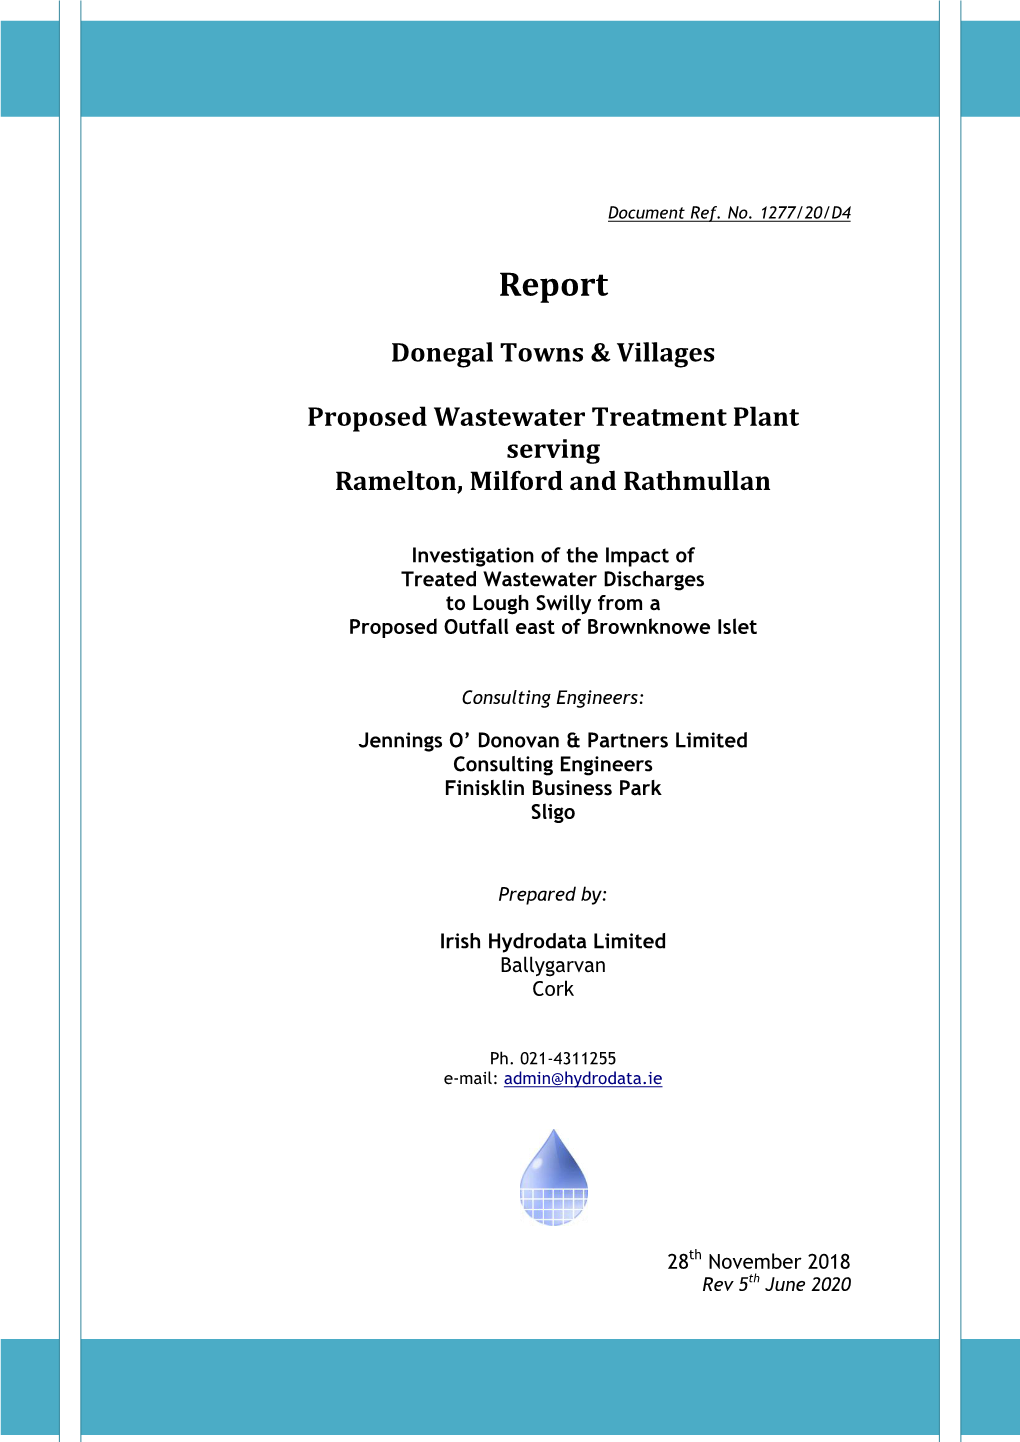 Donegal Towns & Villages Proposed Wastewater Treatment Plant